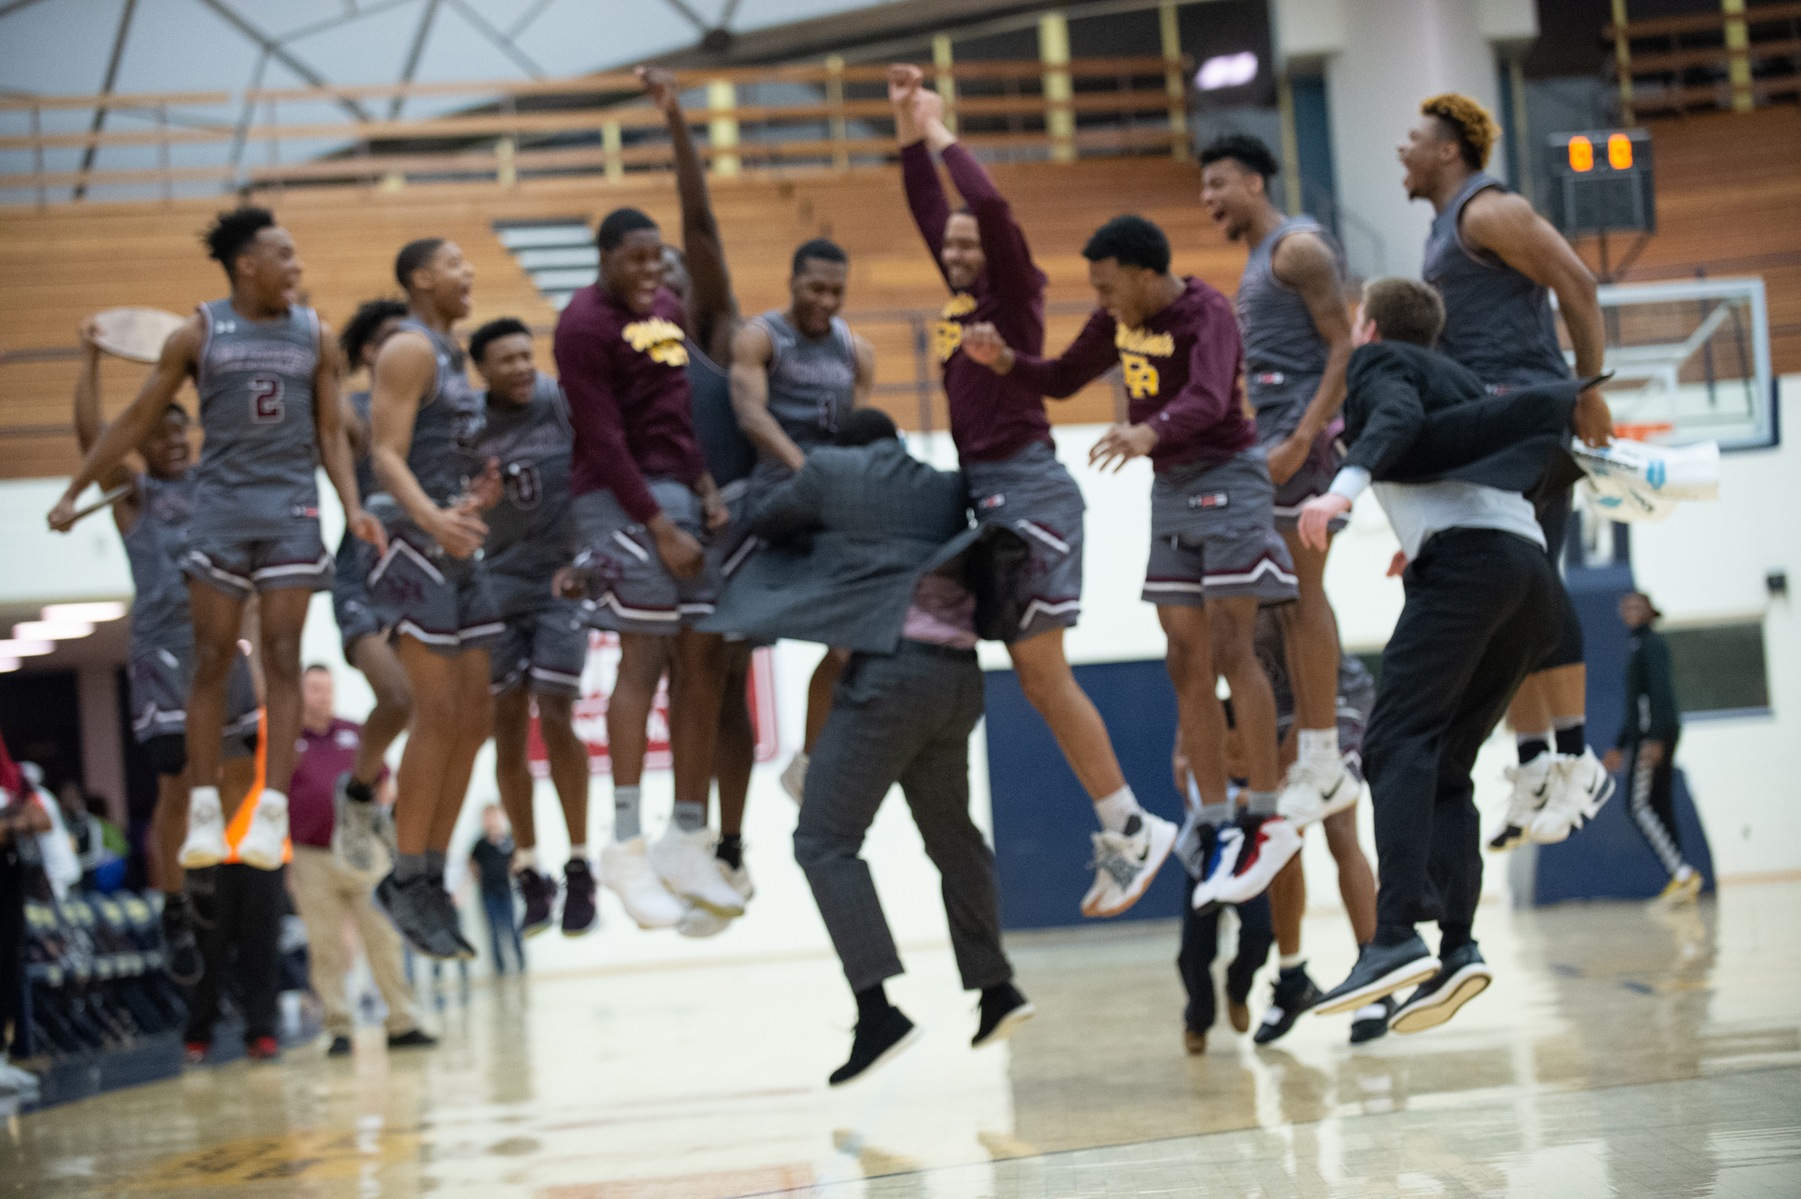 No. 15 Pearl River knocked off Holmes 57-52 on Friday, March 7, 2019, to win the program's first Region XXIII Tournament. The competition was hosted at Mississippi College in Clinton, Miss. With the win, PRCC now moves on to the NJCAA Division I Men's Tournament, which is hosted in Hutchinson, Kansas. (JUCO WEEKLY)